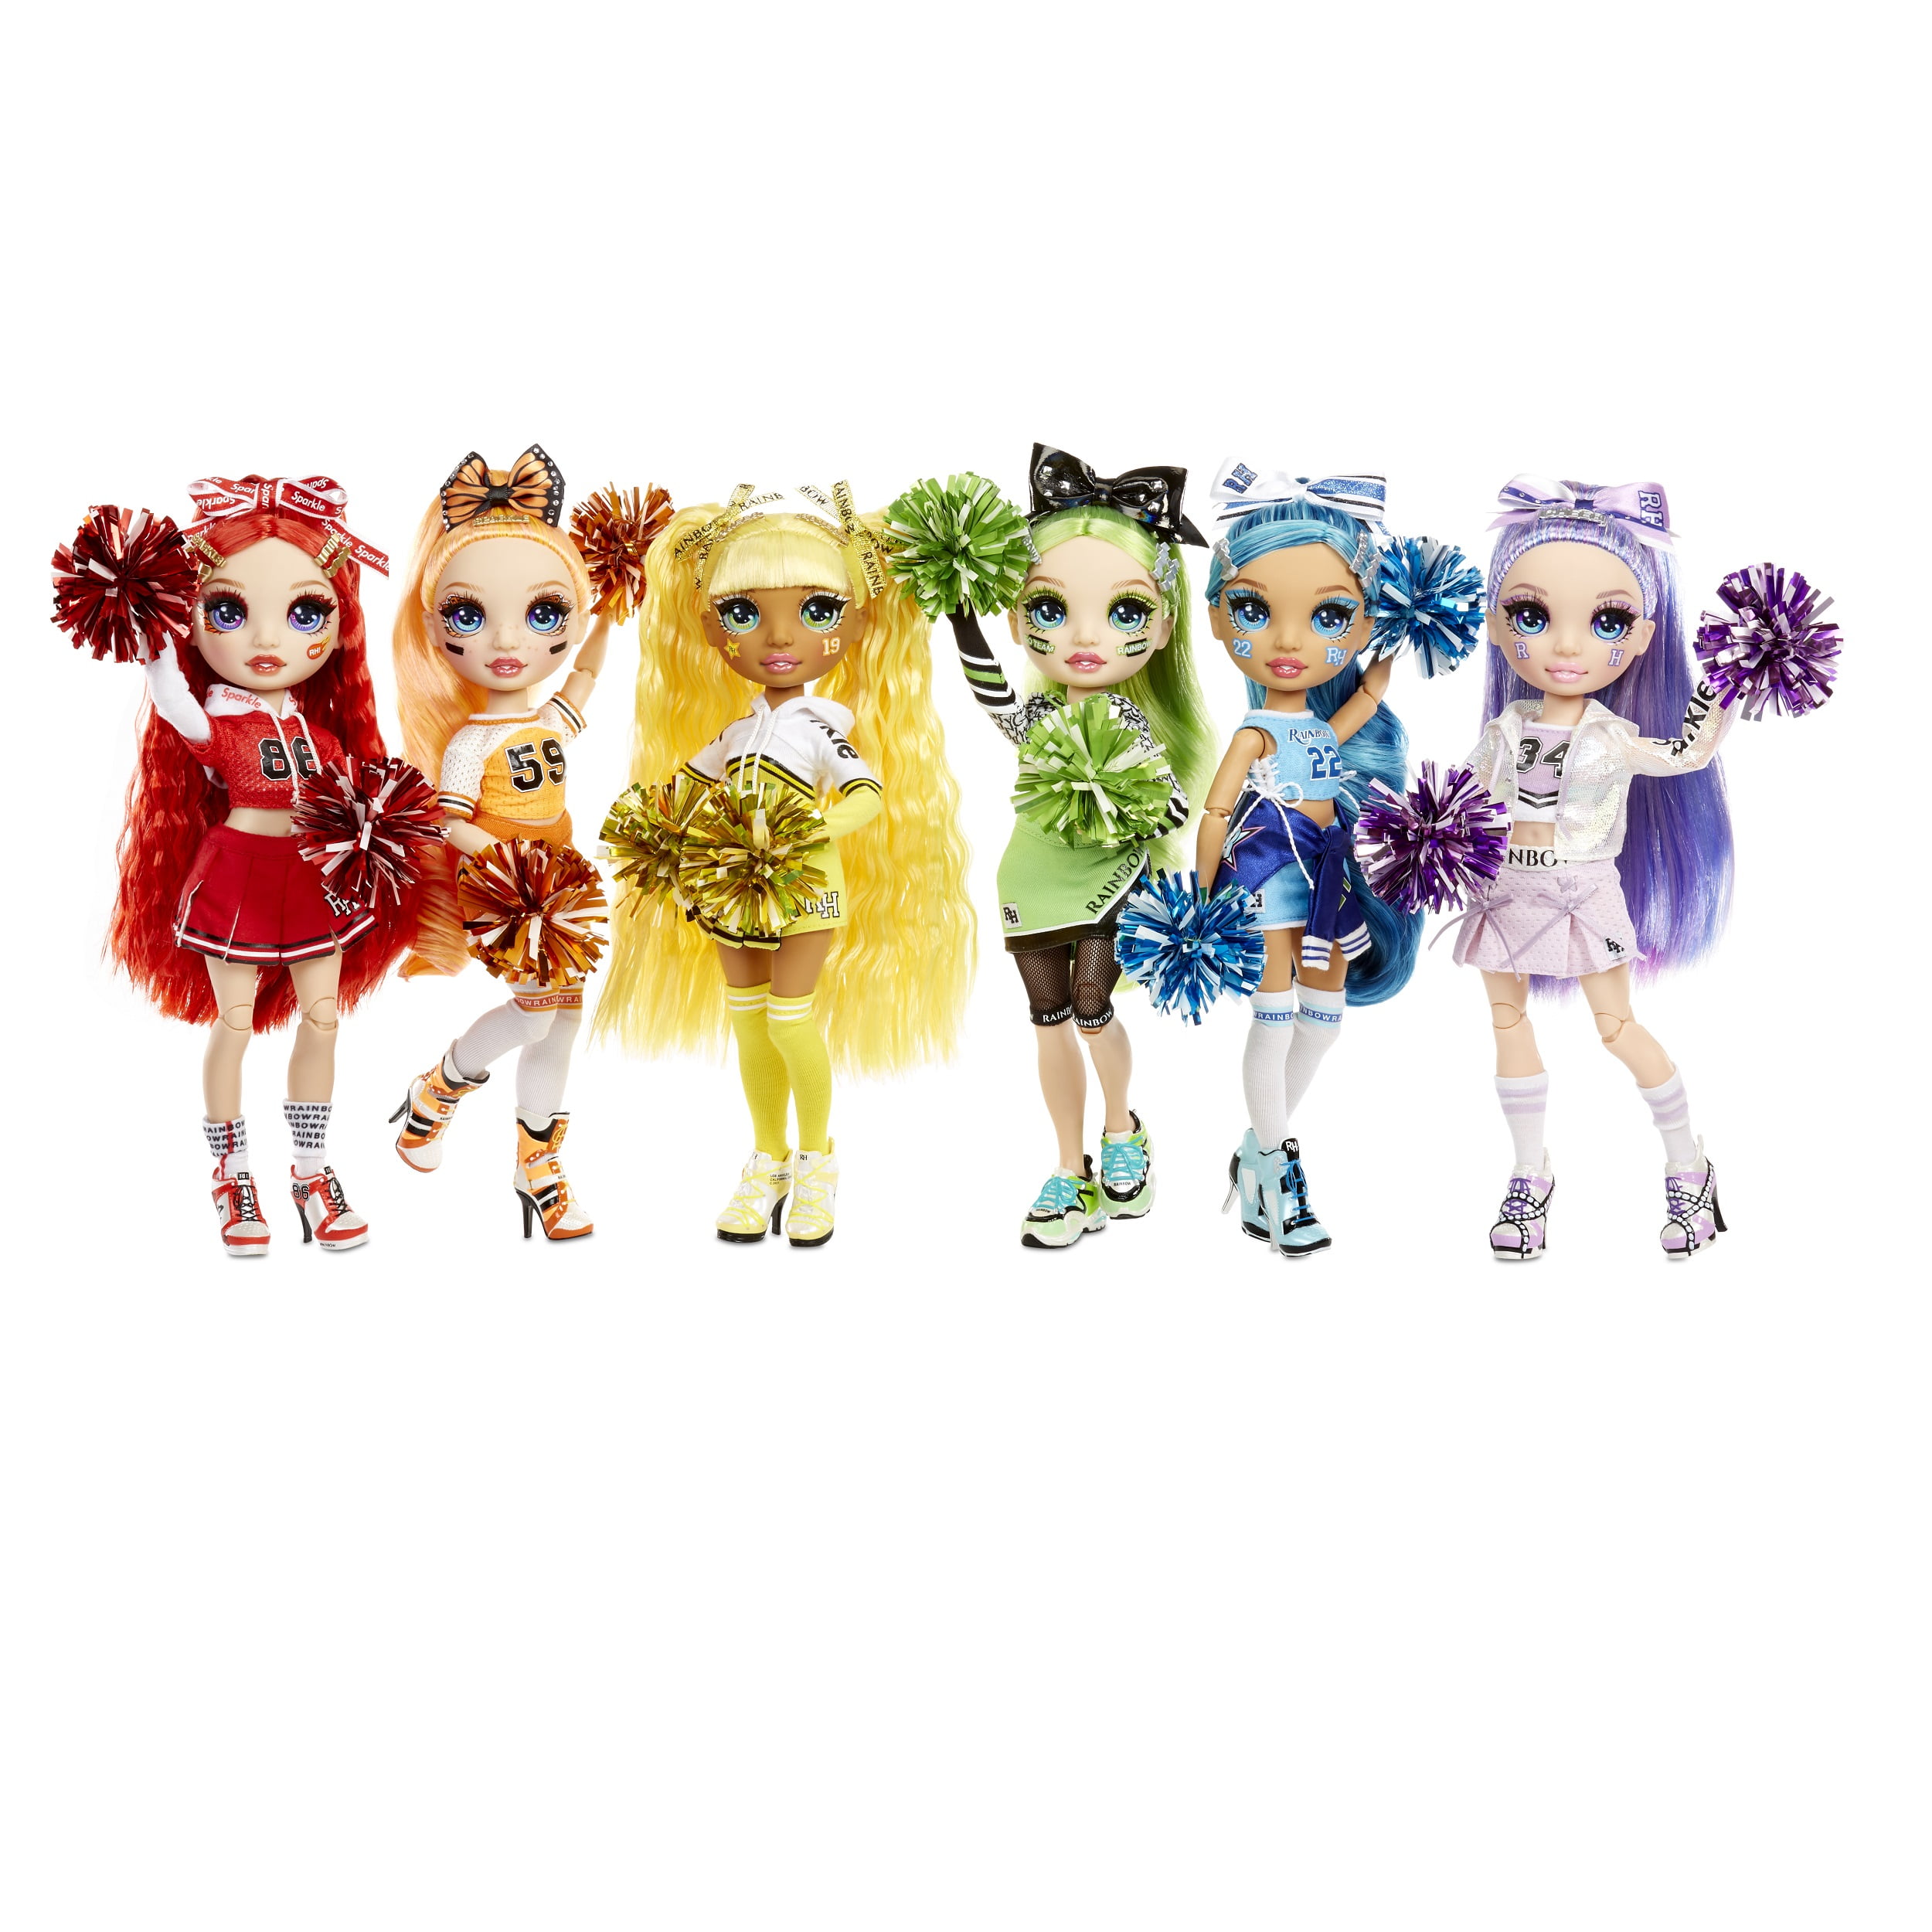 Designer Clothes Sunny Madison Toys for Kids Ages 6-12 Years Old Rainbow High Cheer Collectible Fashion Dolls Rainbow High Cheer Series Yellow Pom Poms /& Cheerleader Doll